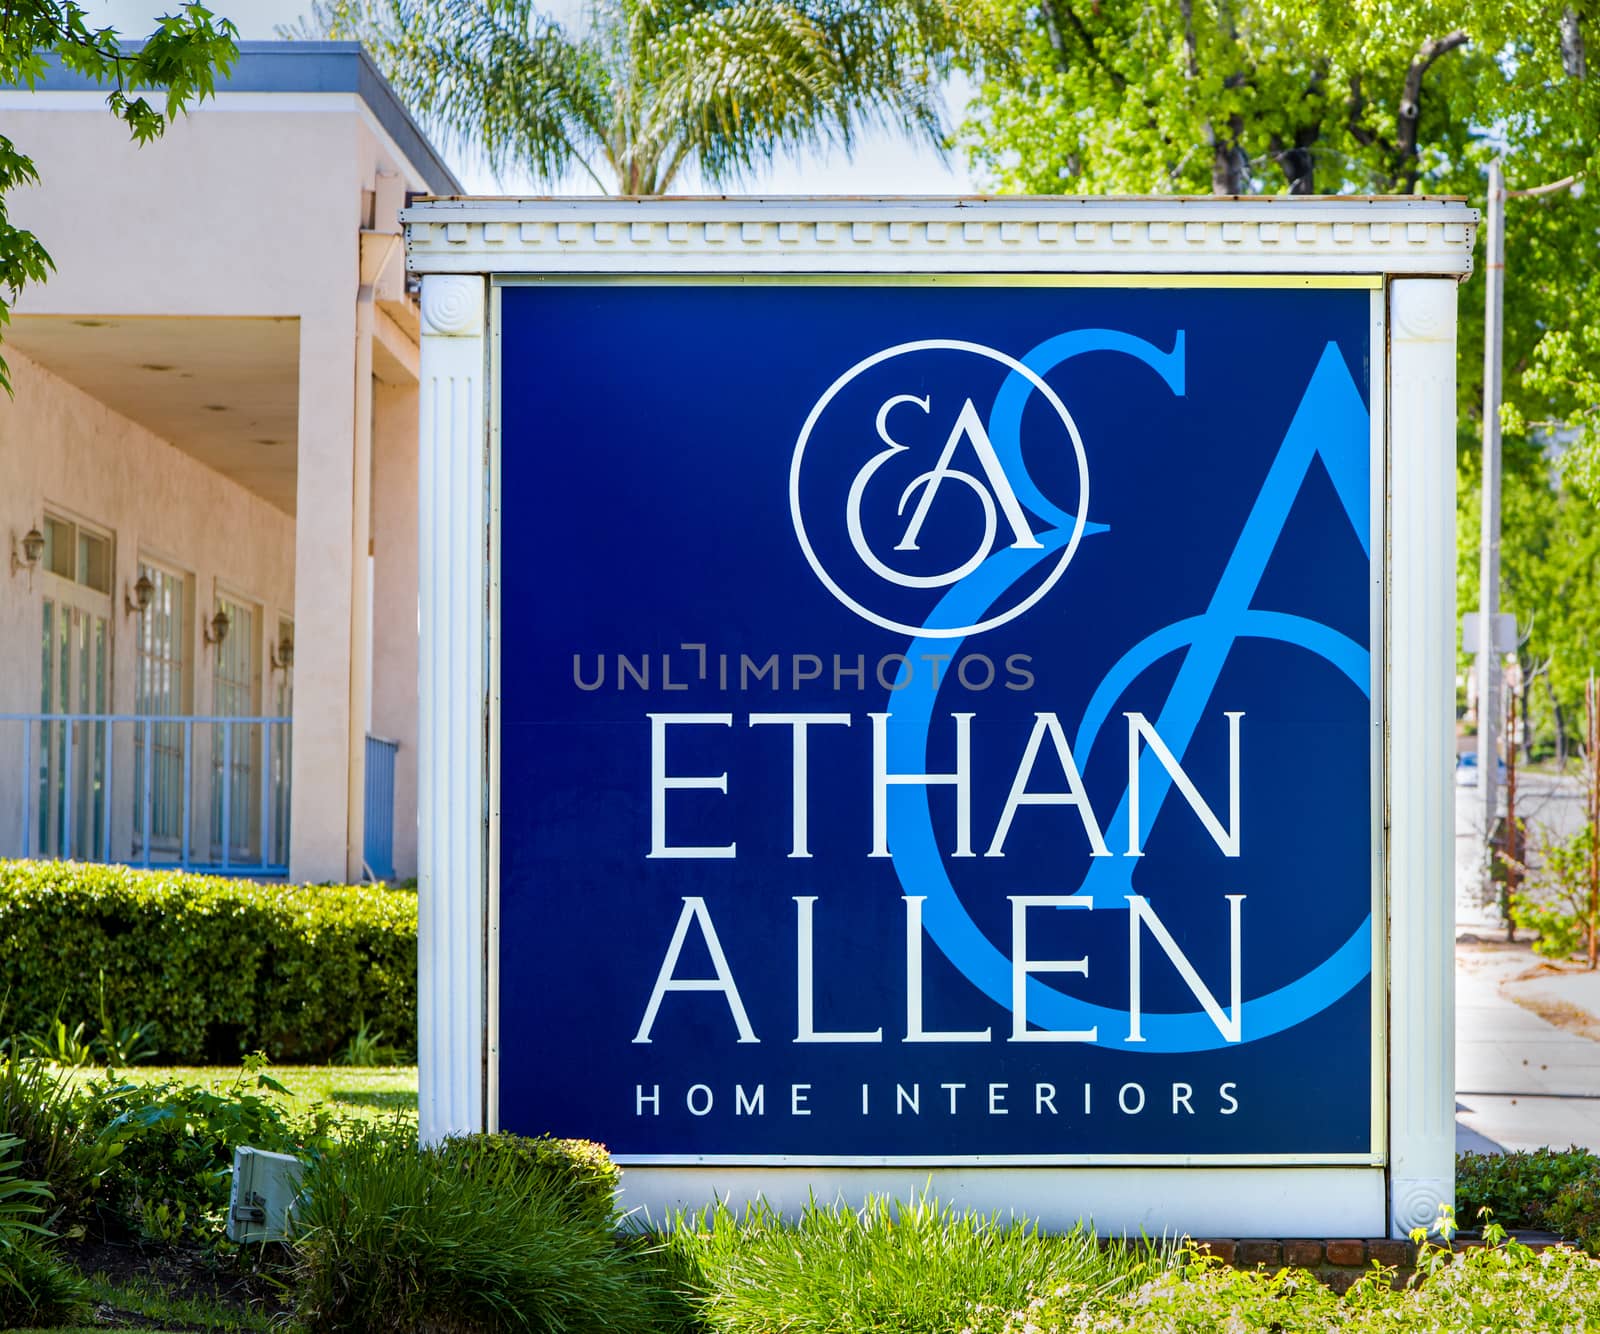 PASADENA, CA/USA - APRIL 16, 2016: Ethan Allen Home Interiors exterior and sign. Ethan Allen Global, Inc. is an American luxury furniture chain.